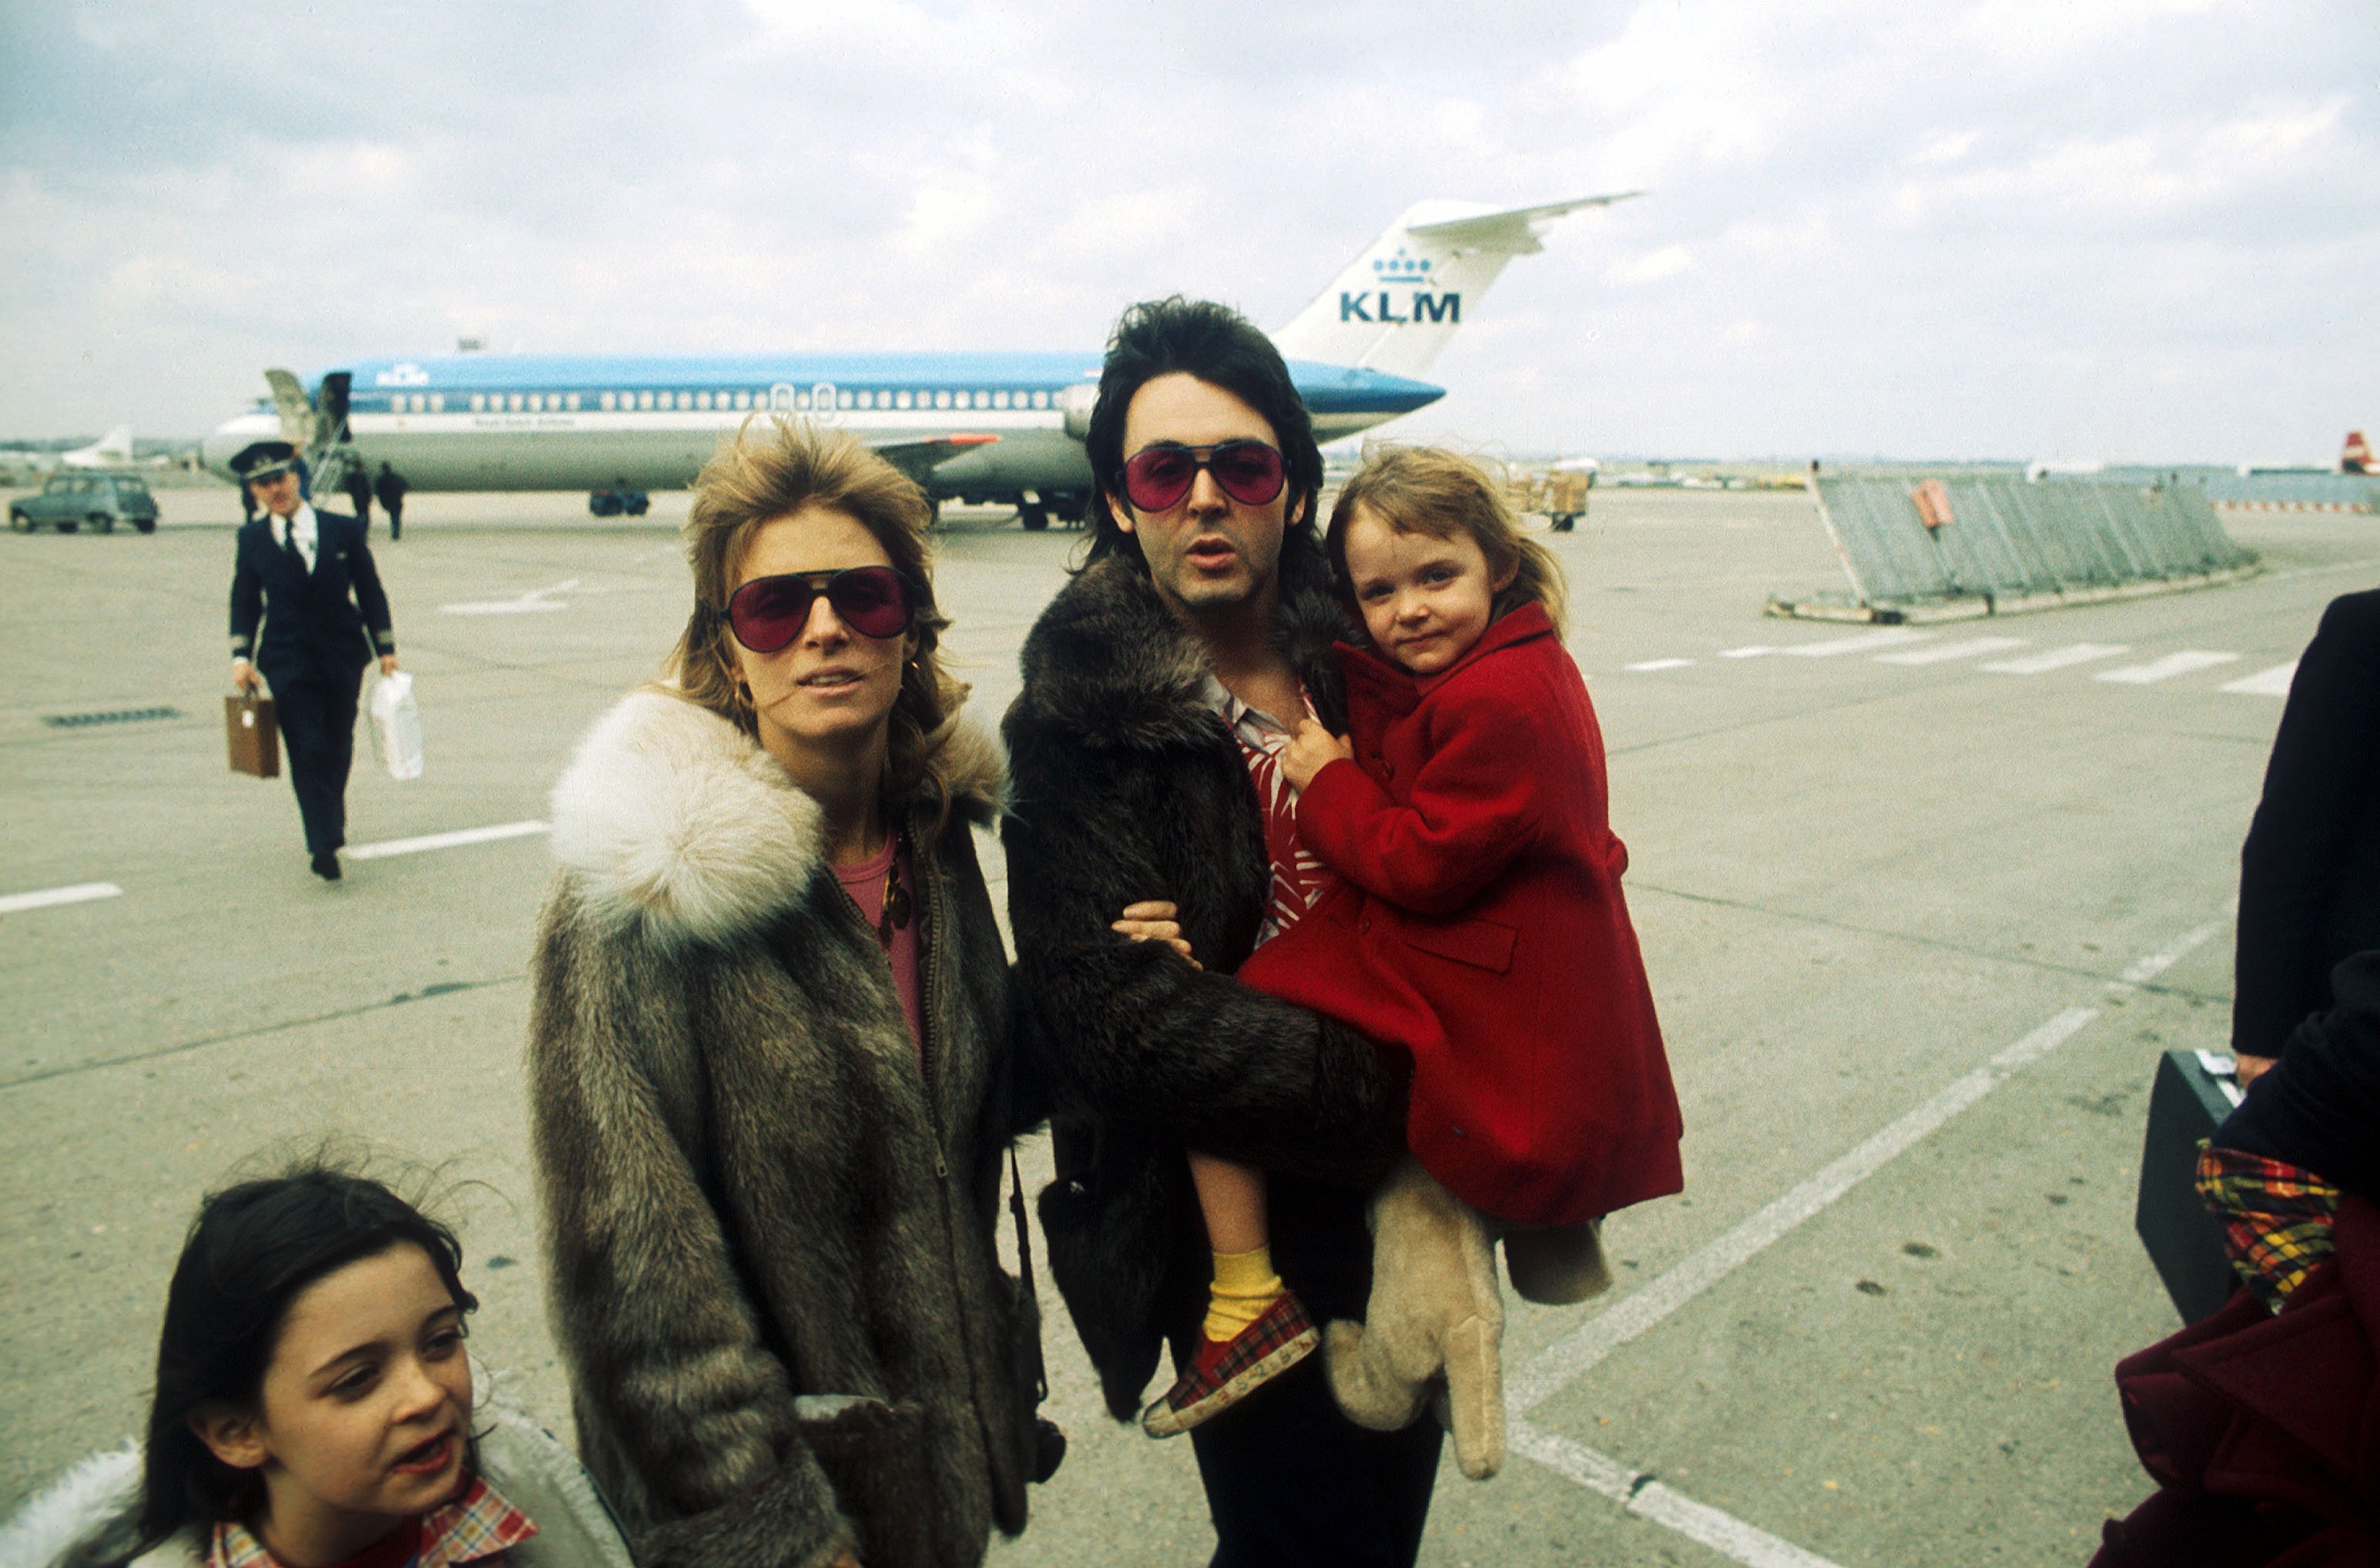 Paul, Linda and Stella McCartney in United Kingdom in April, 1998 | Source: Getty Images